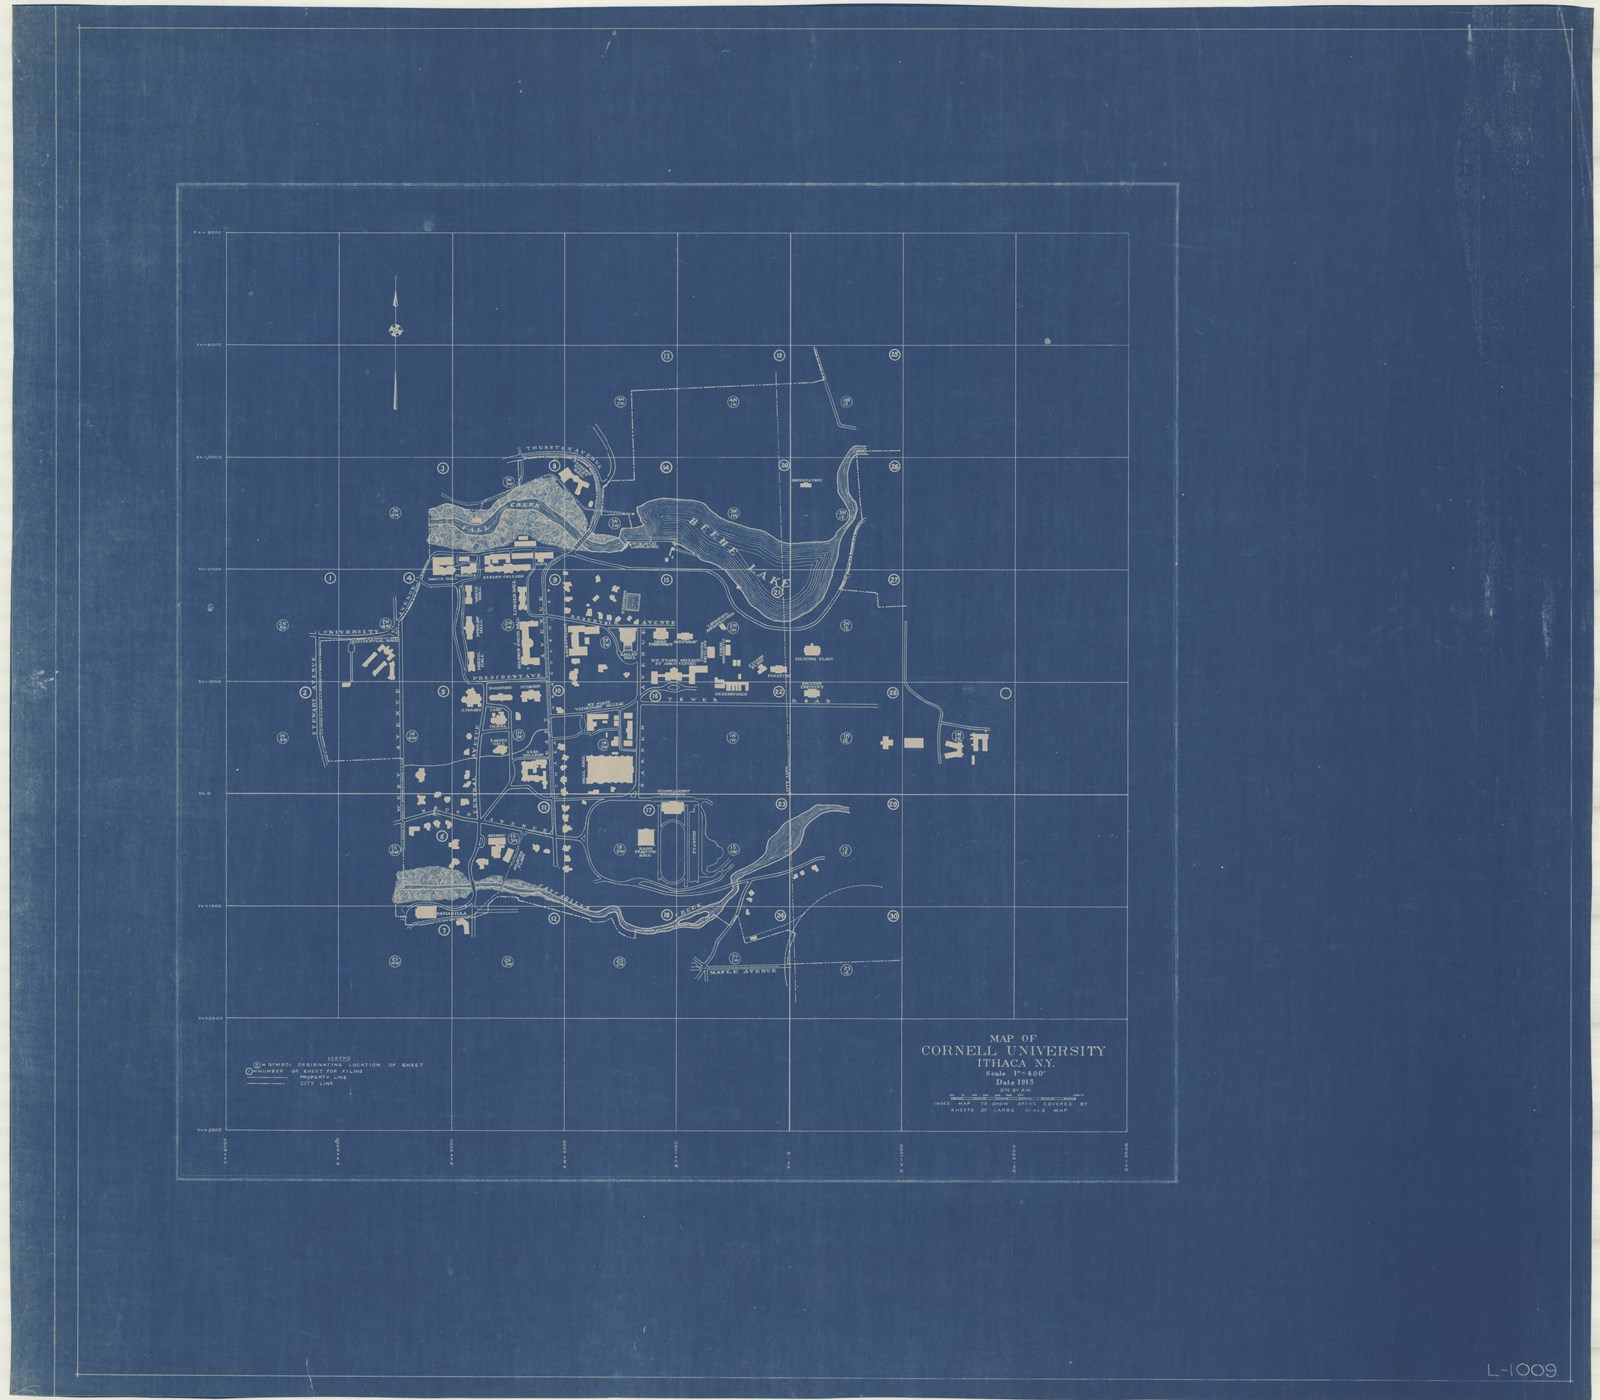 Blueprint of campus with lots of buildings and paths